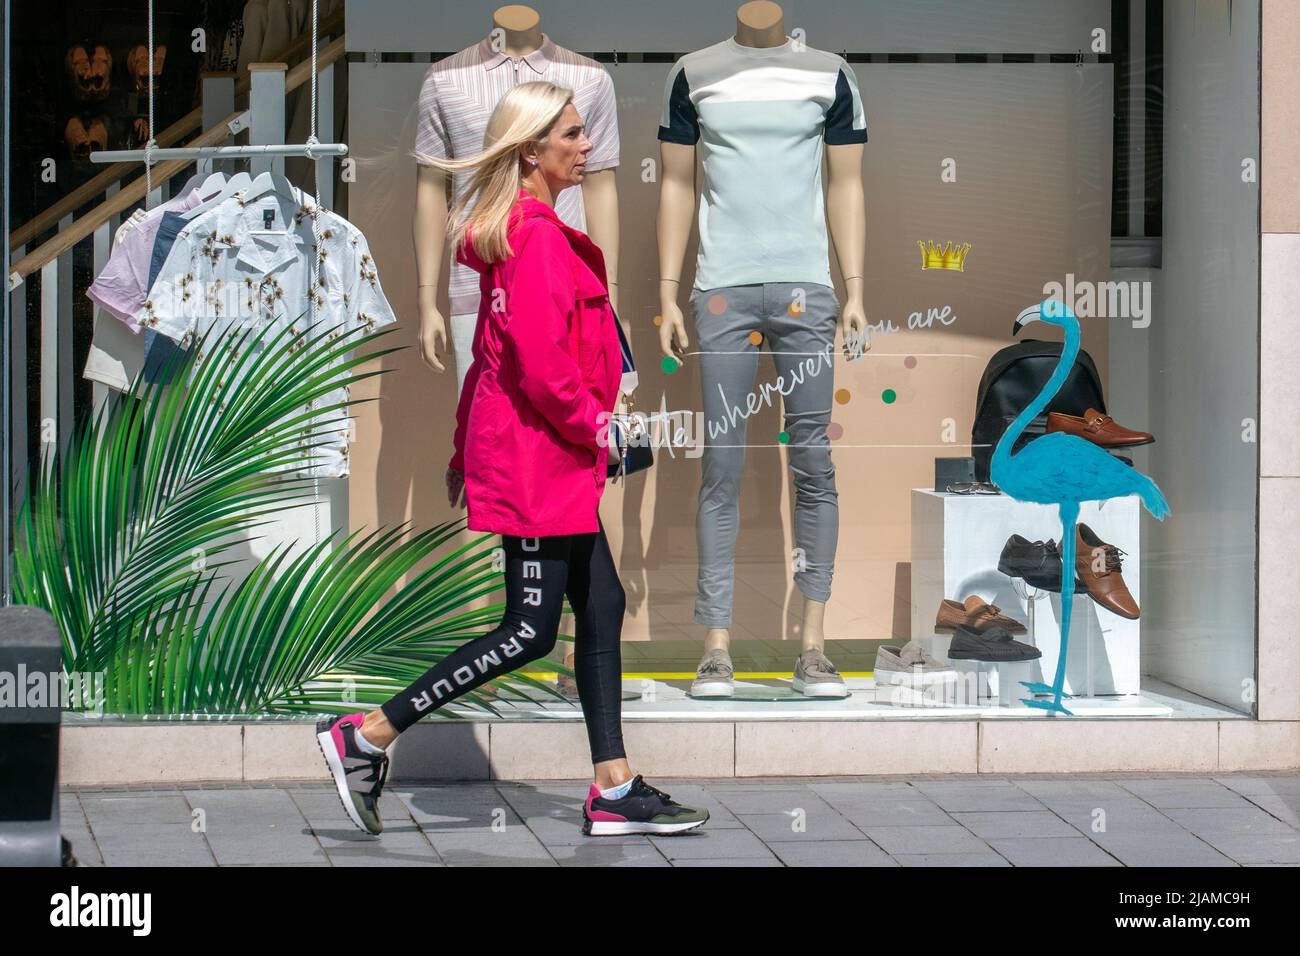 Southport, Merseyside.  Uk Weather.  31 May 2022. Shops, shoppers, shopping with a sunny start to the day in the north-west coastal resort. Temperatures are expected to rise with the prospect of a fine bright holiday Jubilee celebration weekend.  Credit; MediaWorldImages/AlamyLiveNews Stock Photo